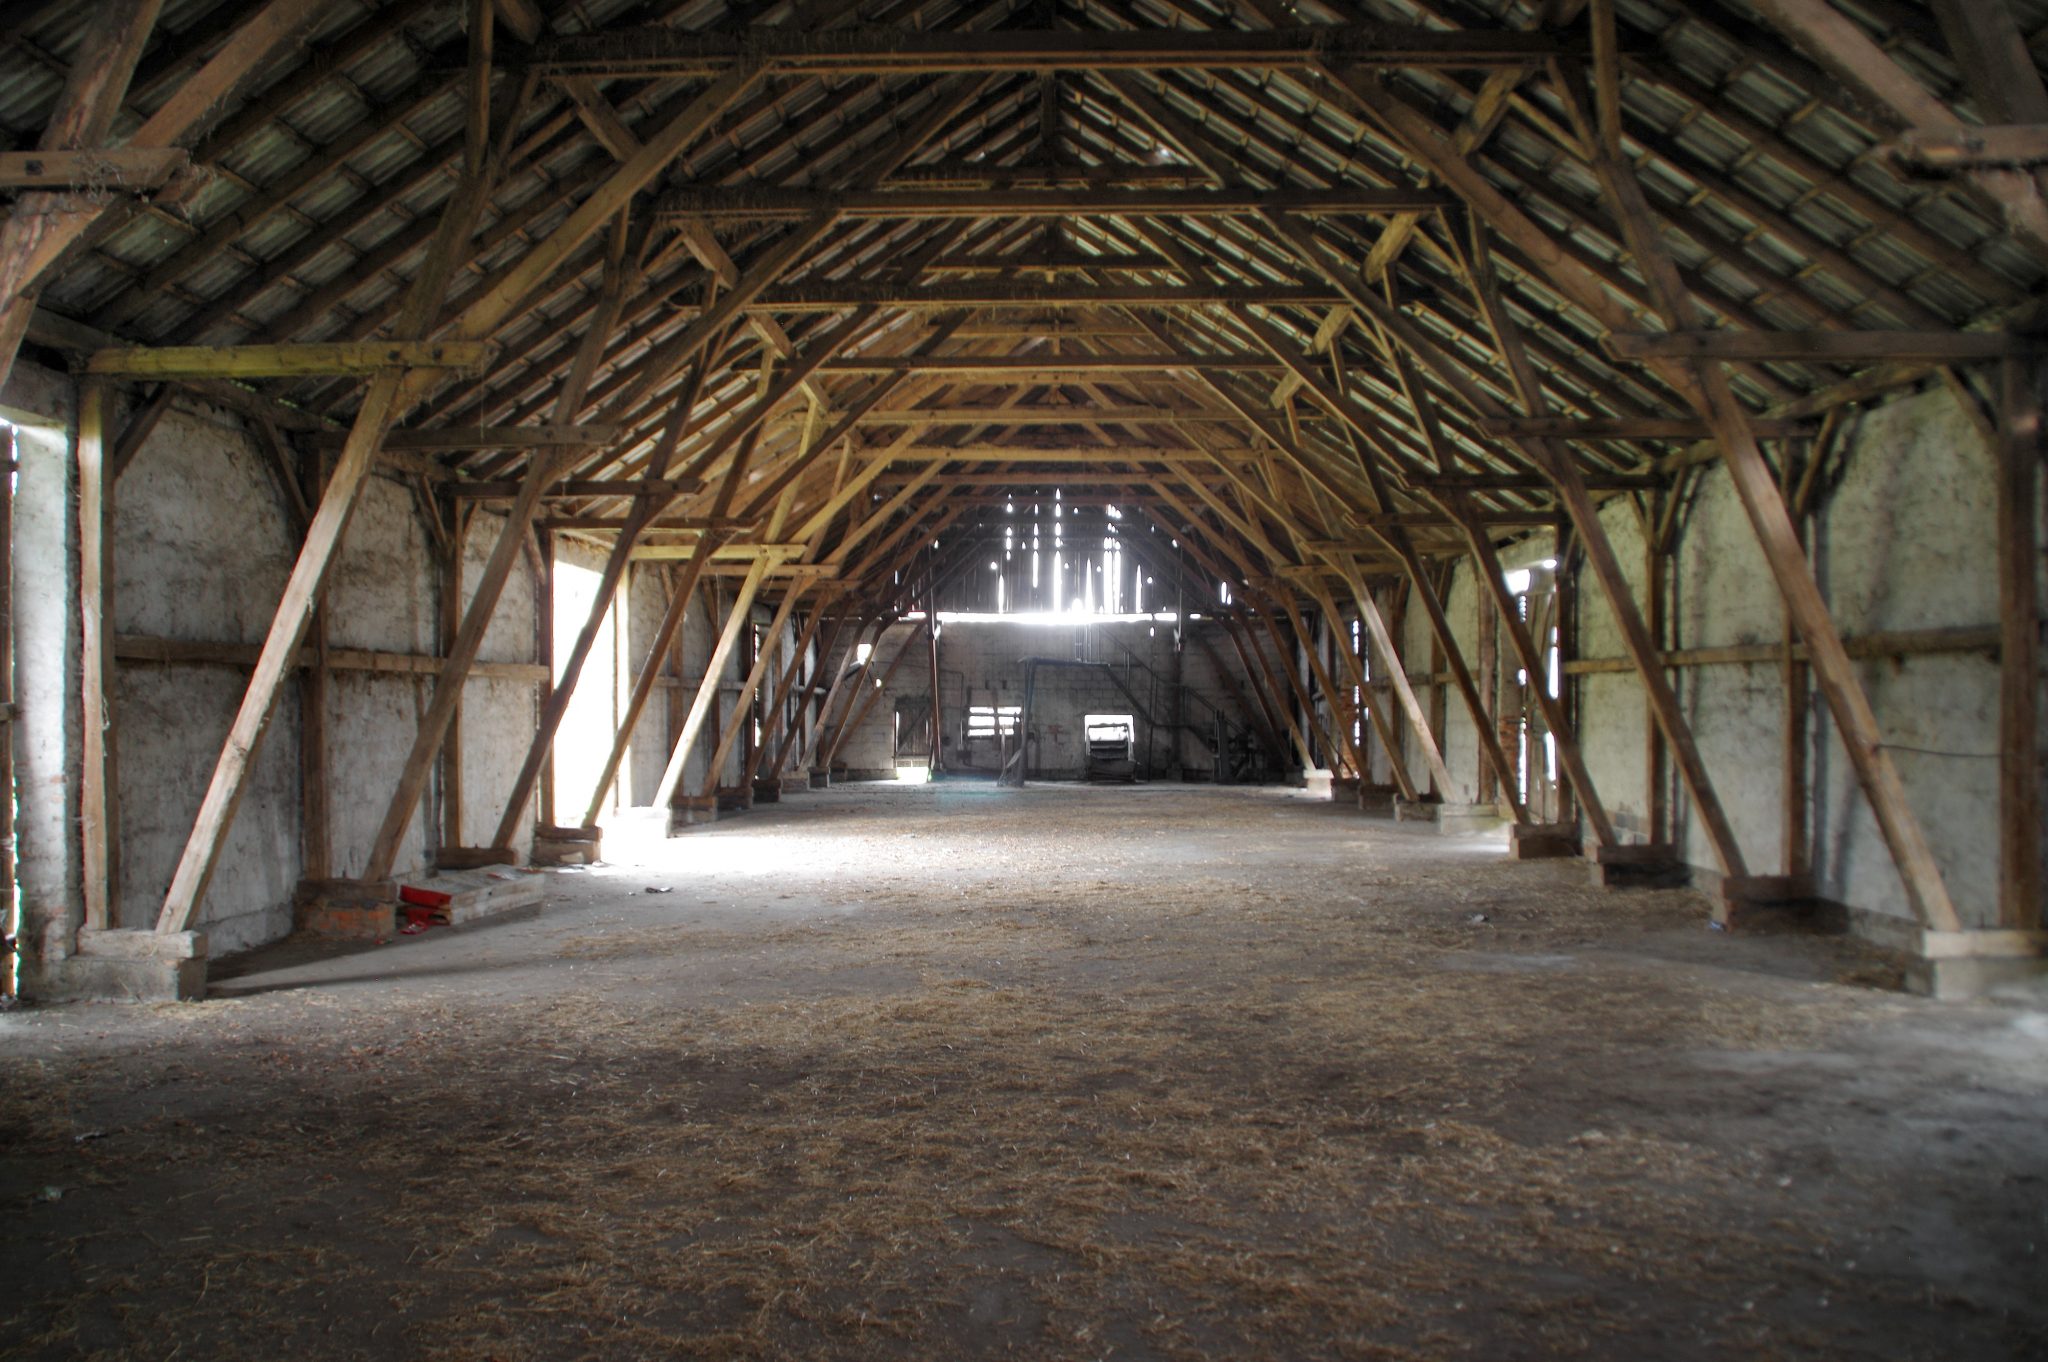 Empty rural barn with wooden supports